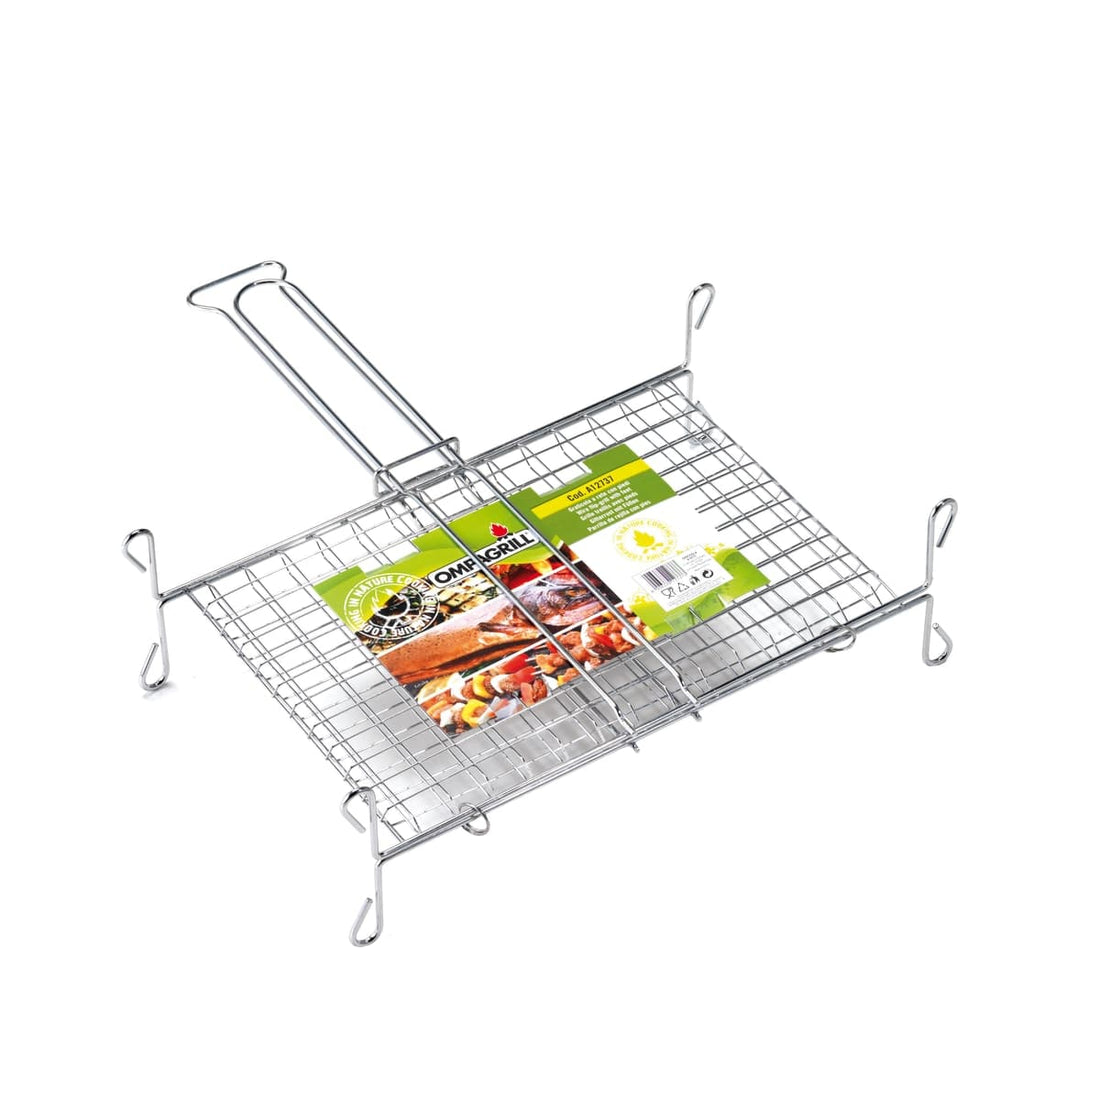 MESH GRILL WITH BARBECUE FEET 40X35CM - best price from Maltashopper.com BR500010710